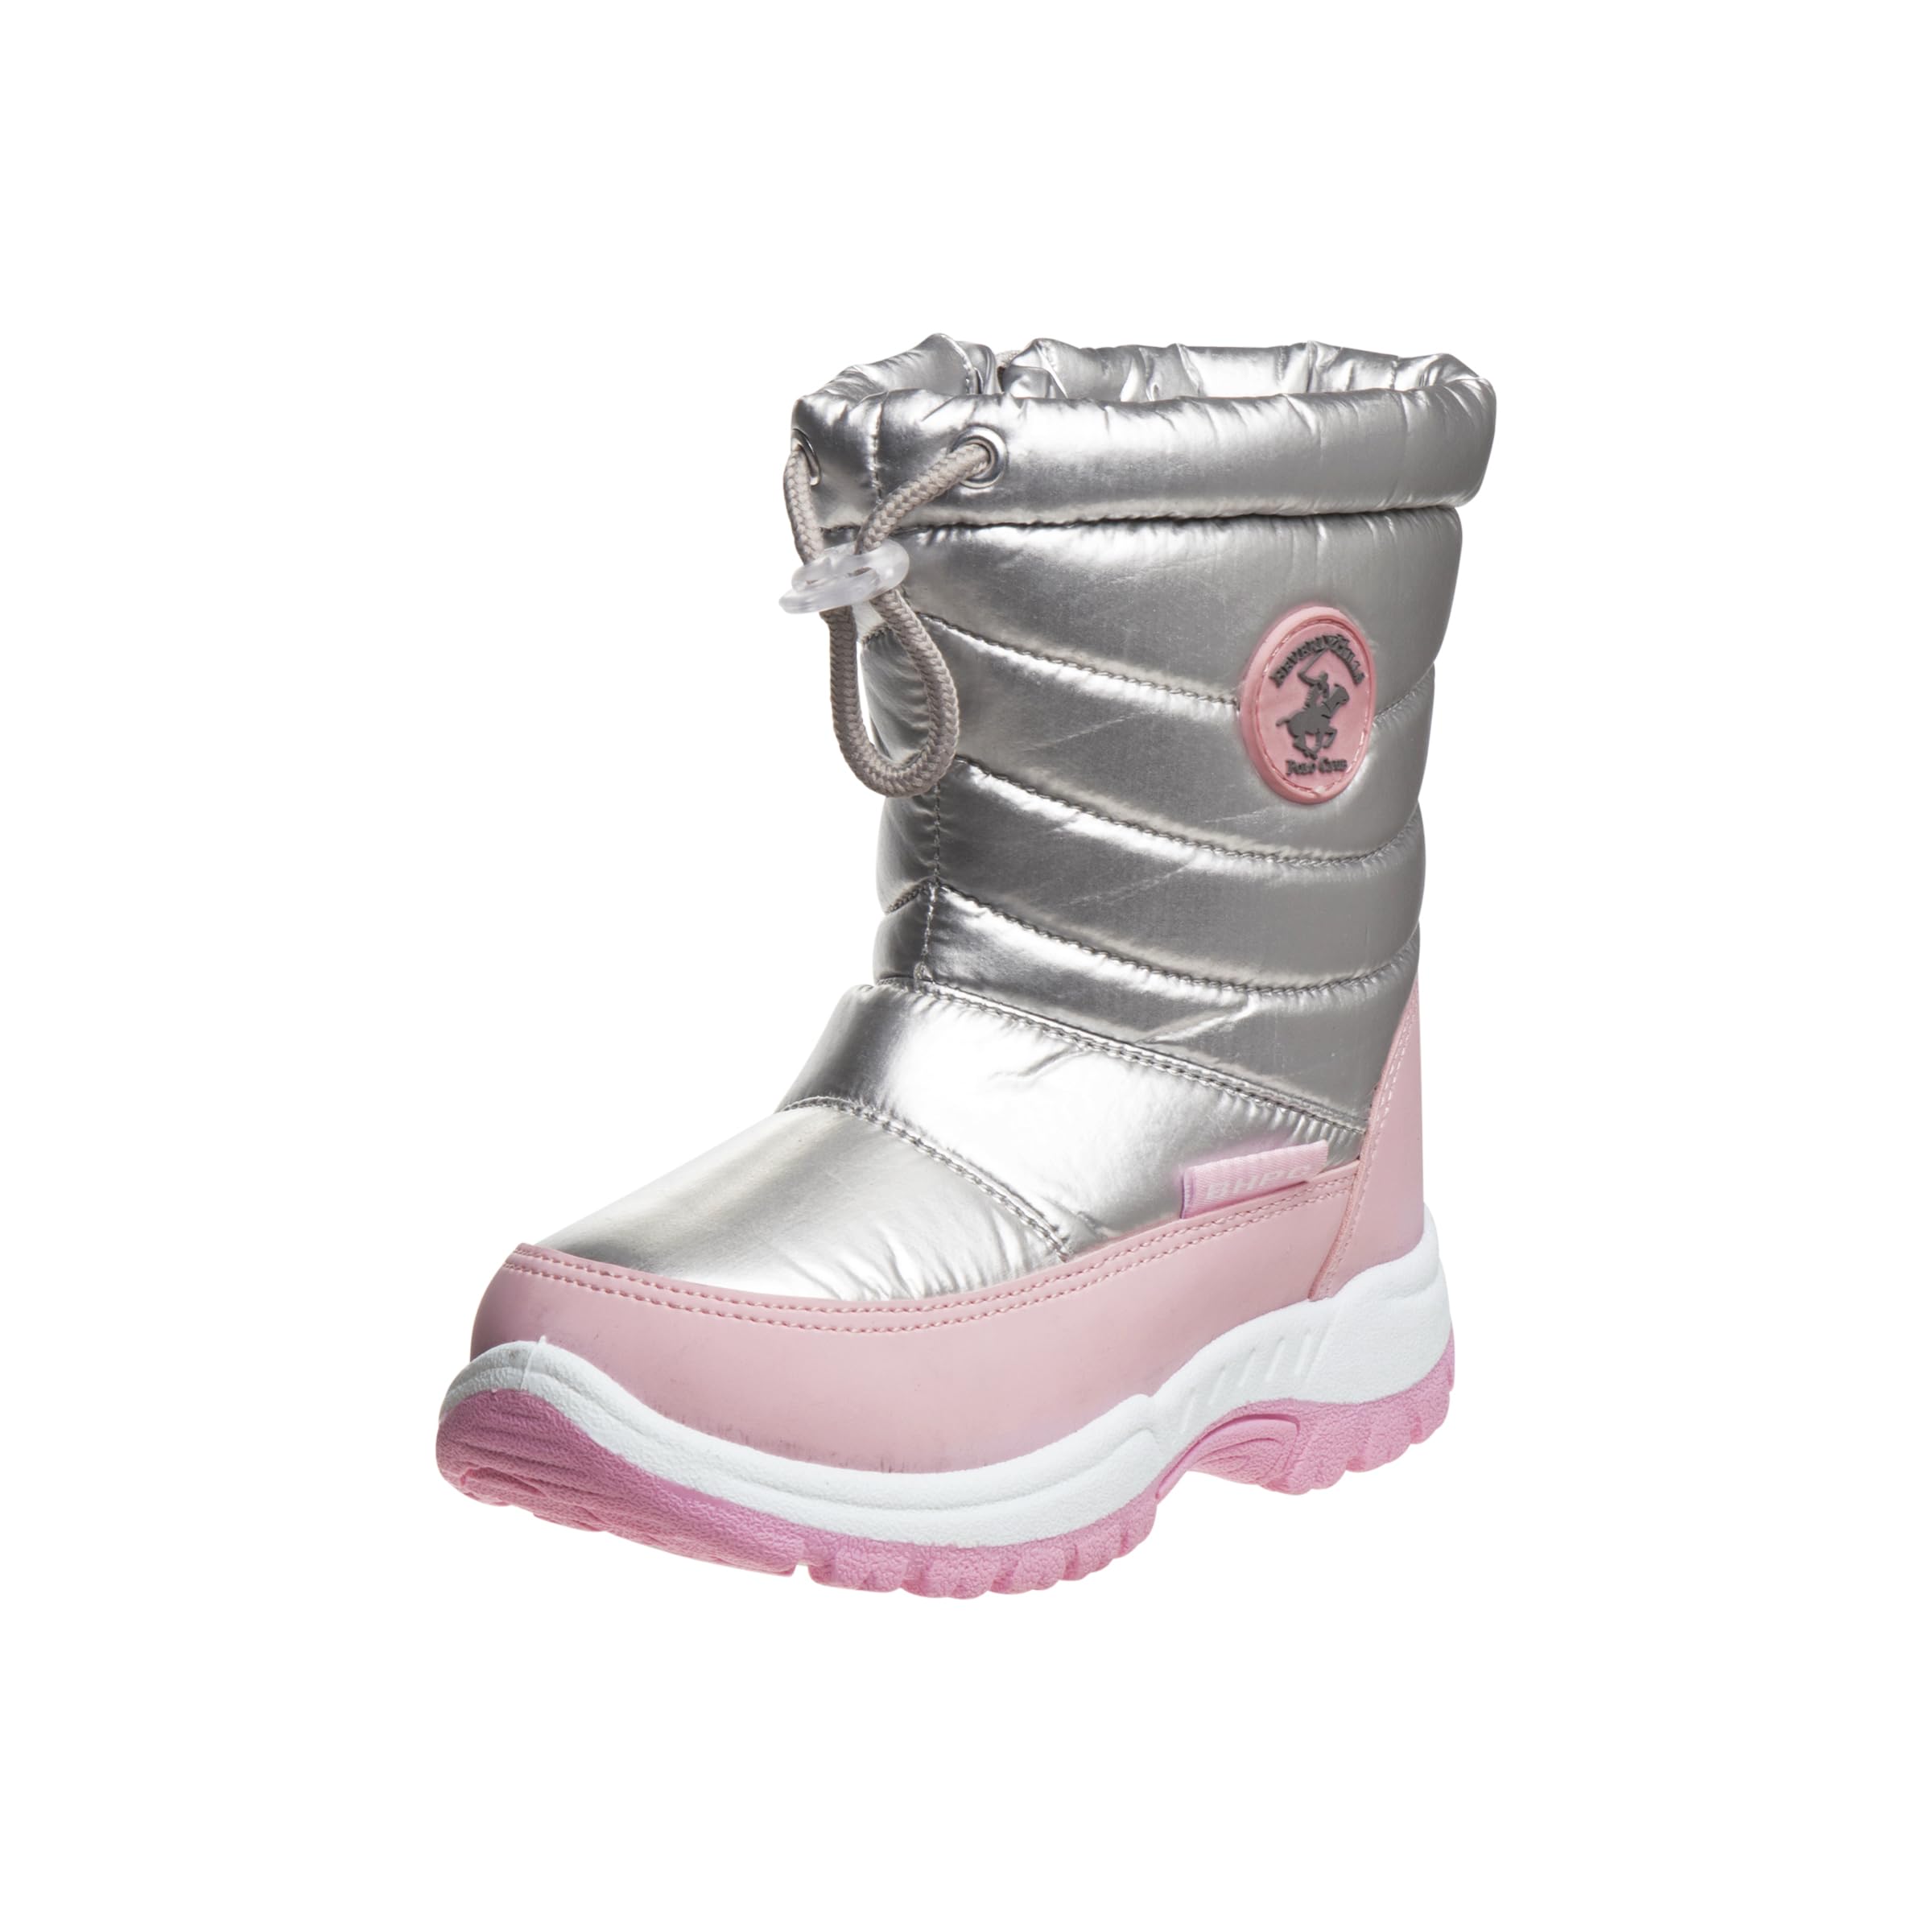 Beverly Hills Girl's Insulated Winter Snow Boots (Toddler-Little Kid)